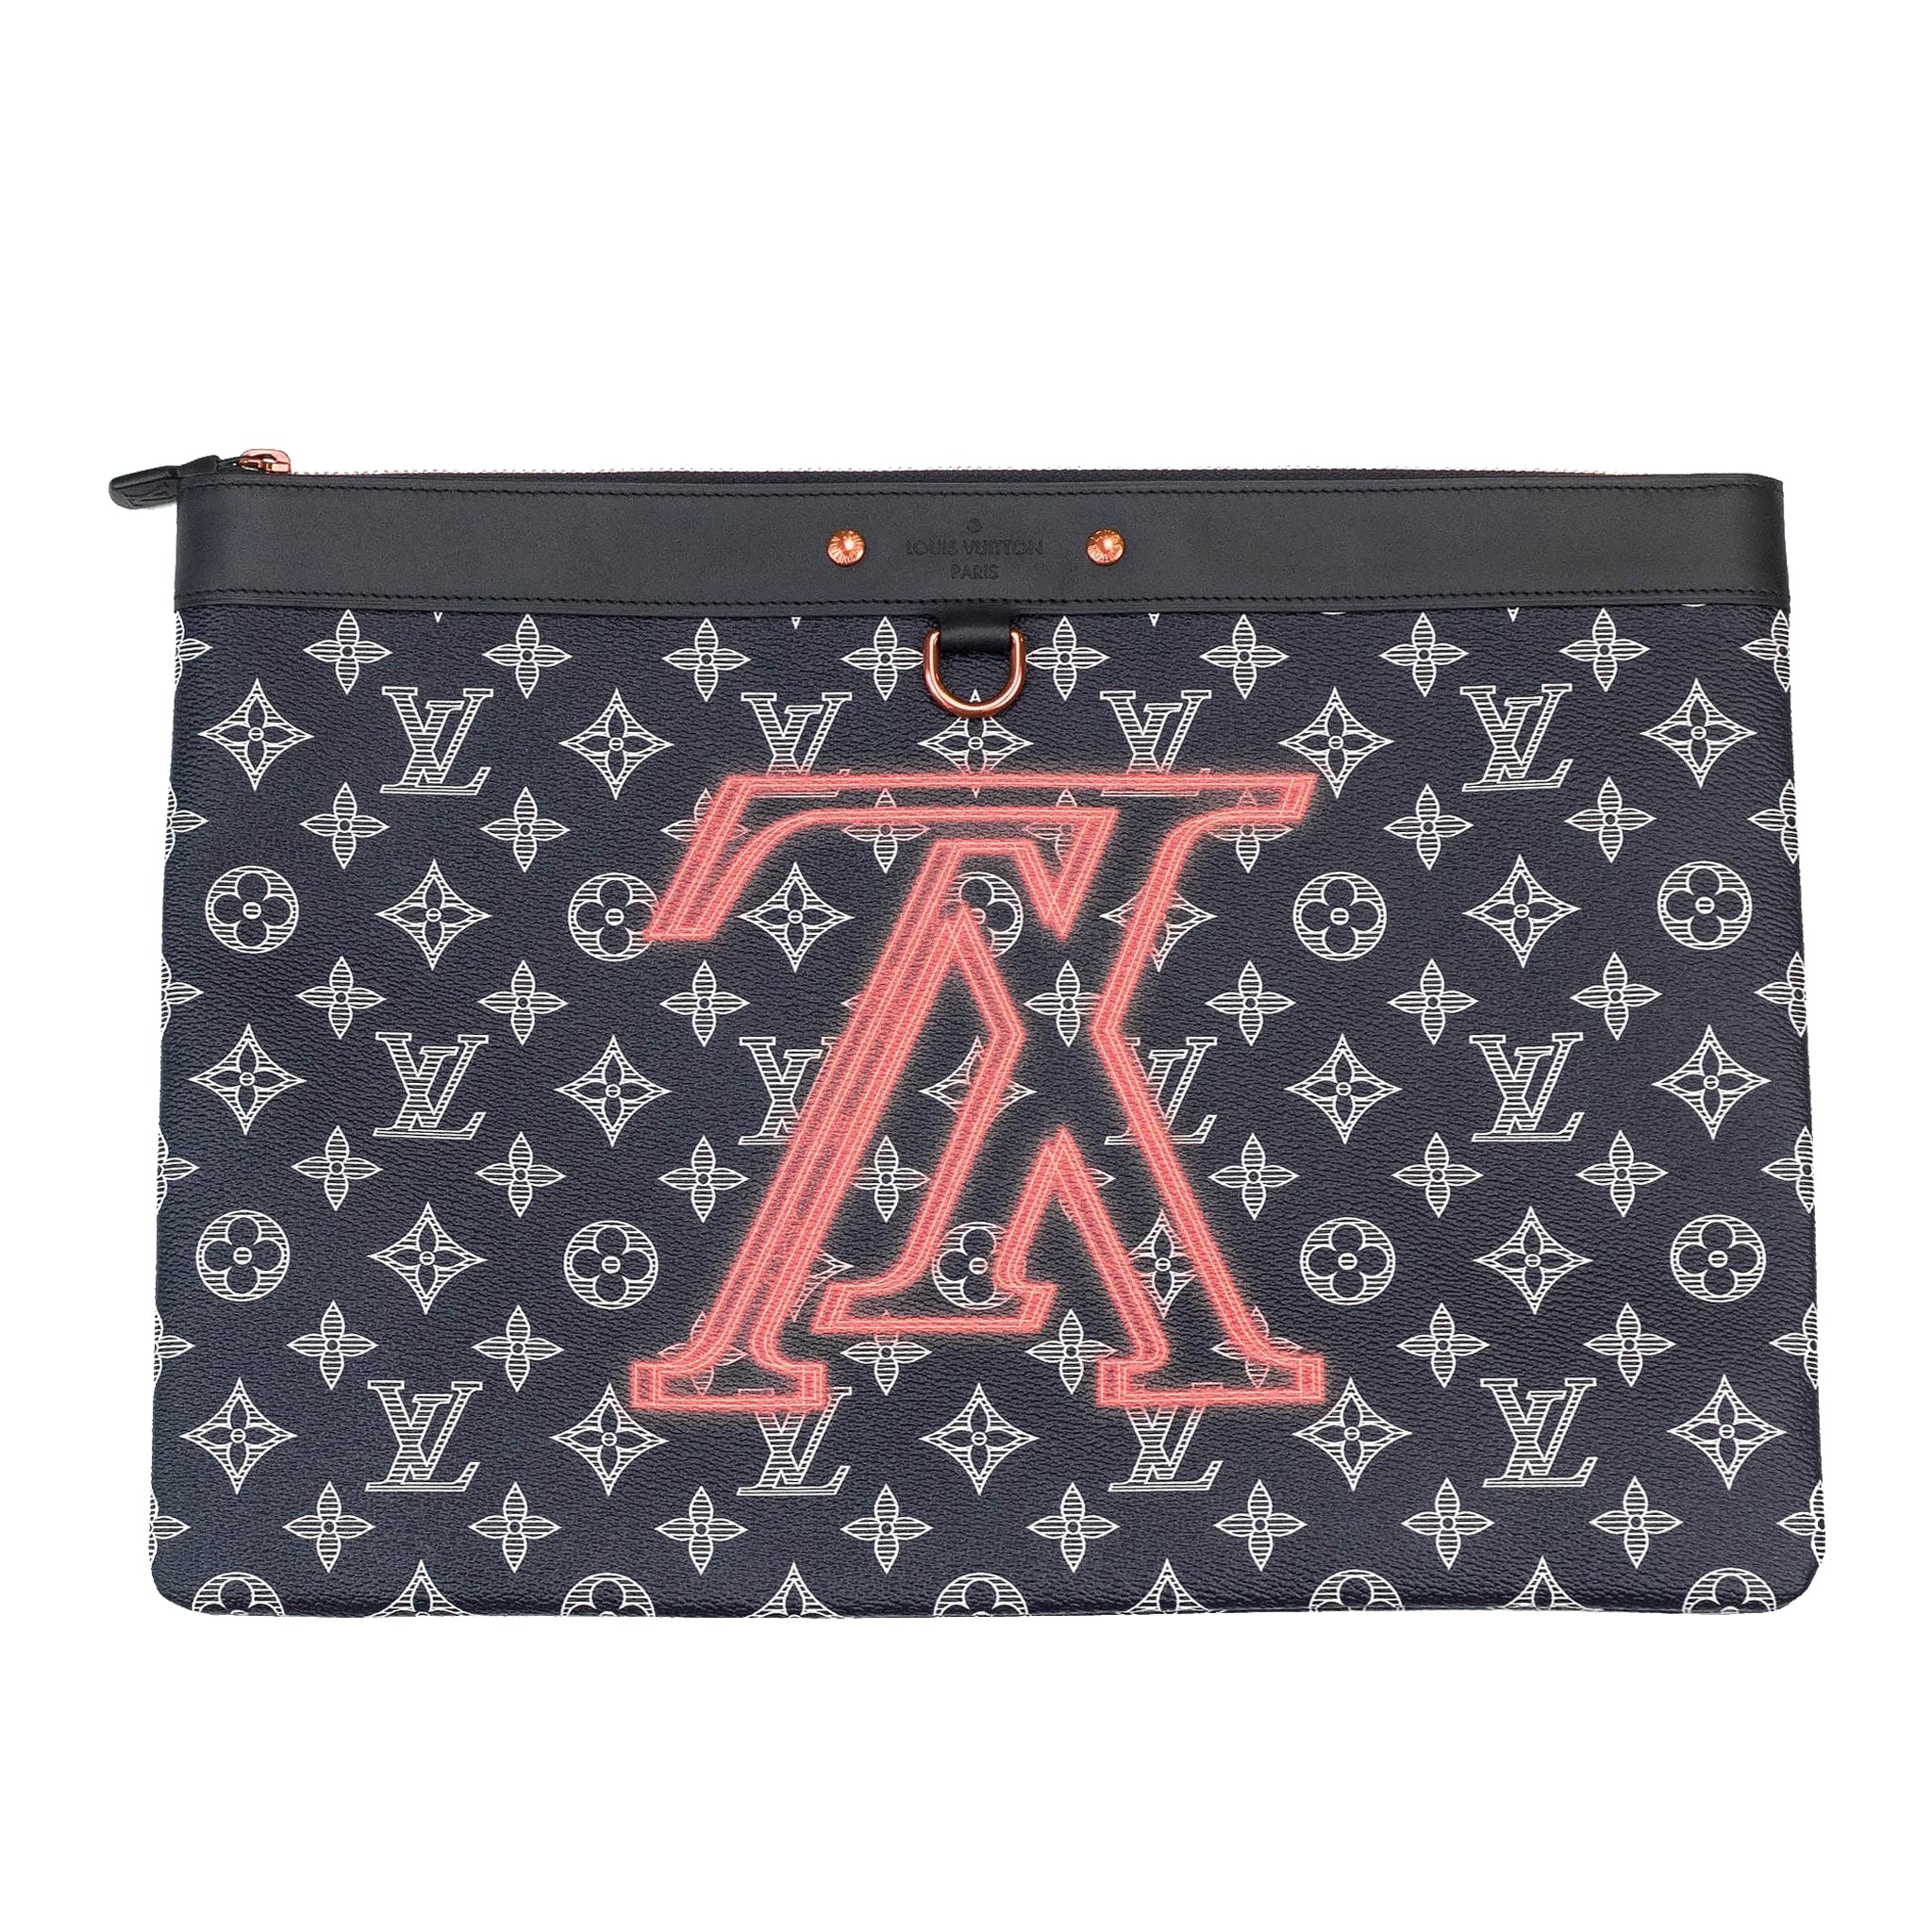 Louis Vuitton Apollo Backpack Limited Edition Upside Down Monogram Ink